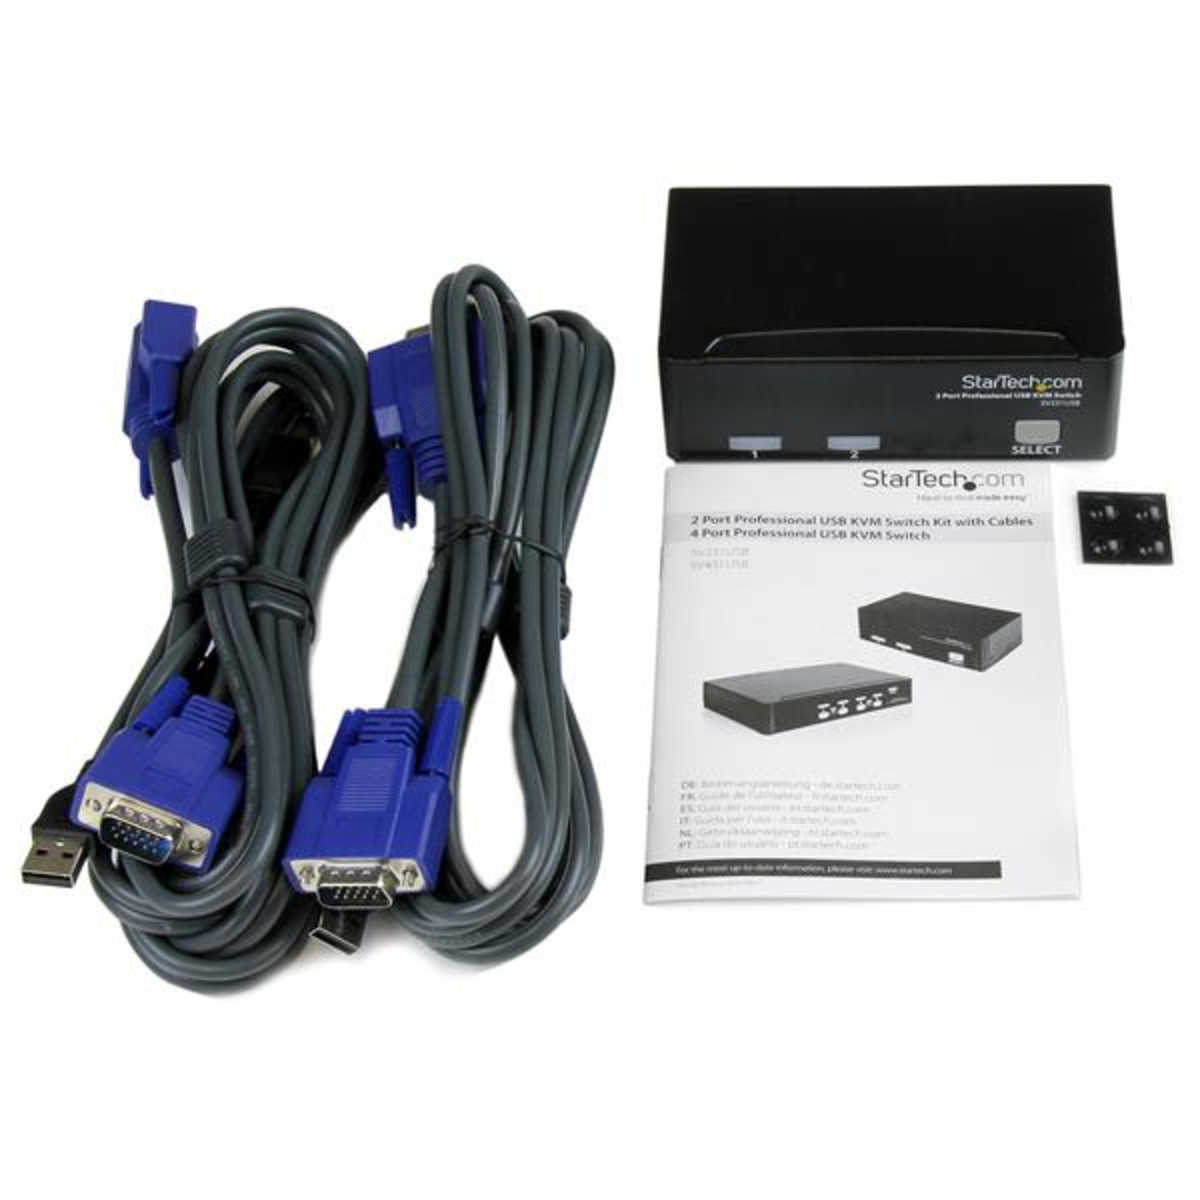 2 Port USB KVM Switch Kit with Cables